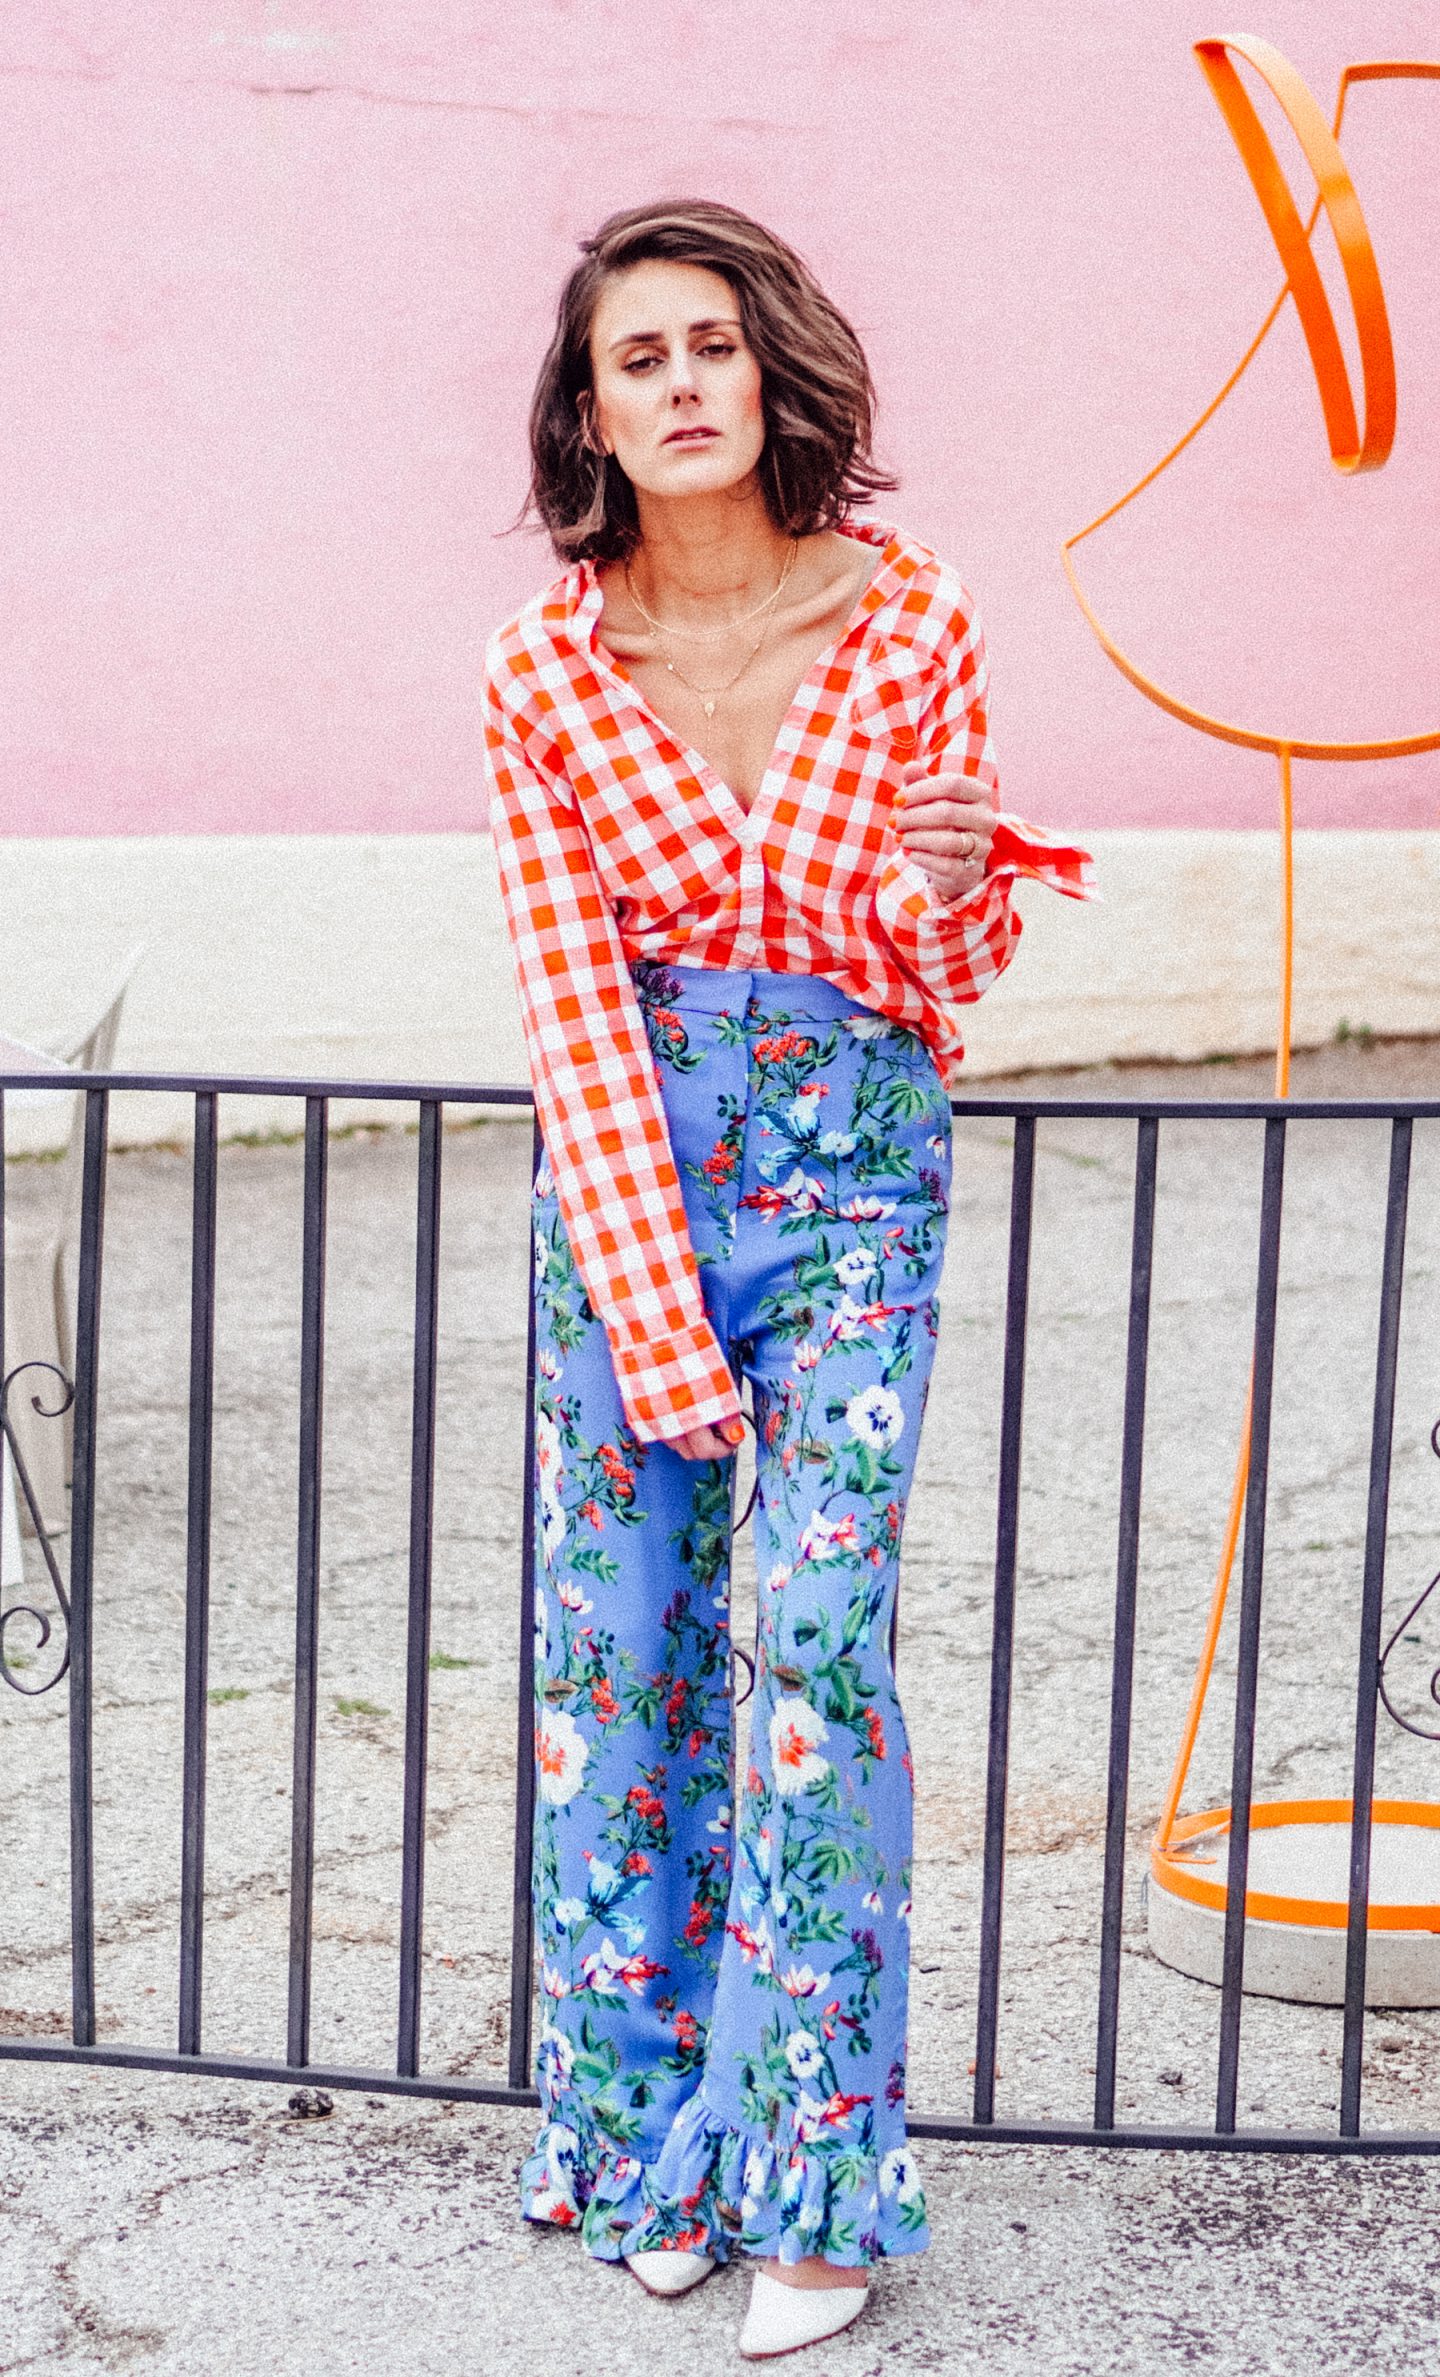 I am sharing two simple rules on how to mix prints and patterns like a pro, so that you can pull them off with confidence.